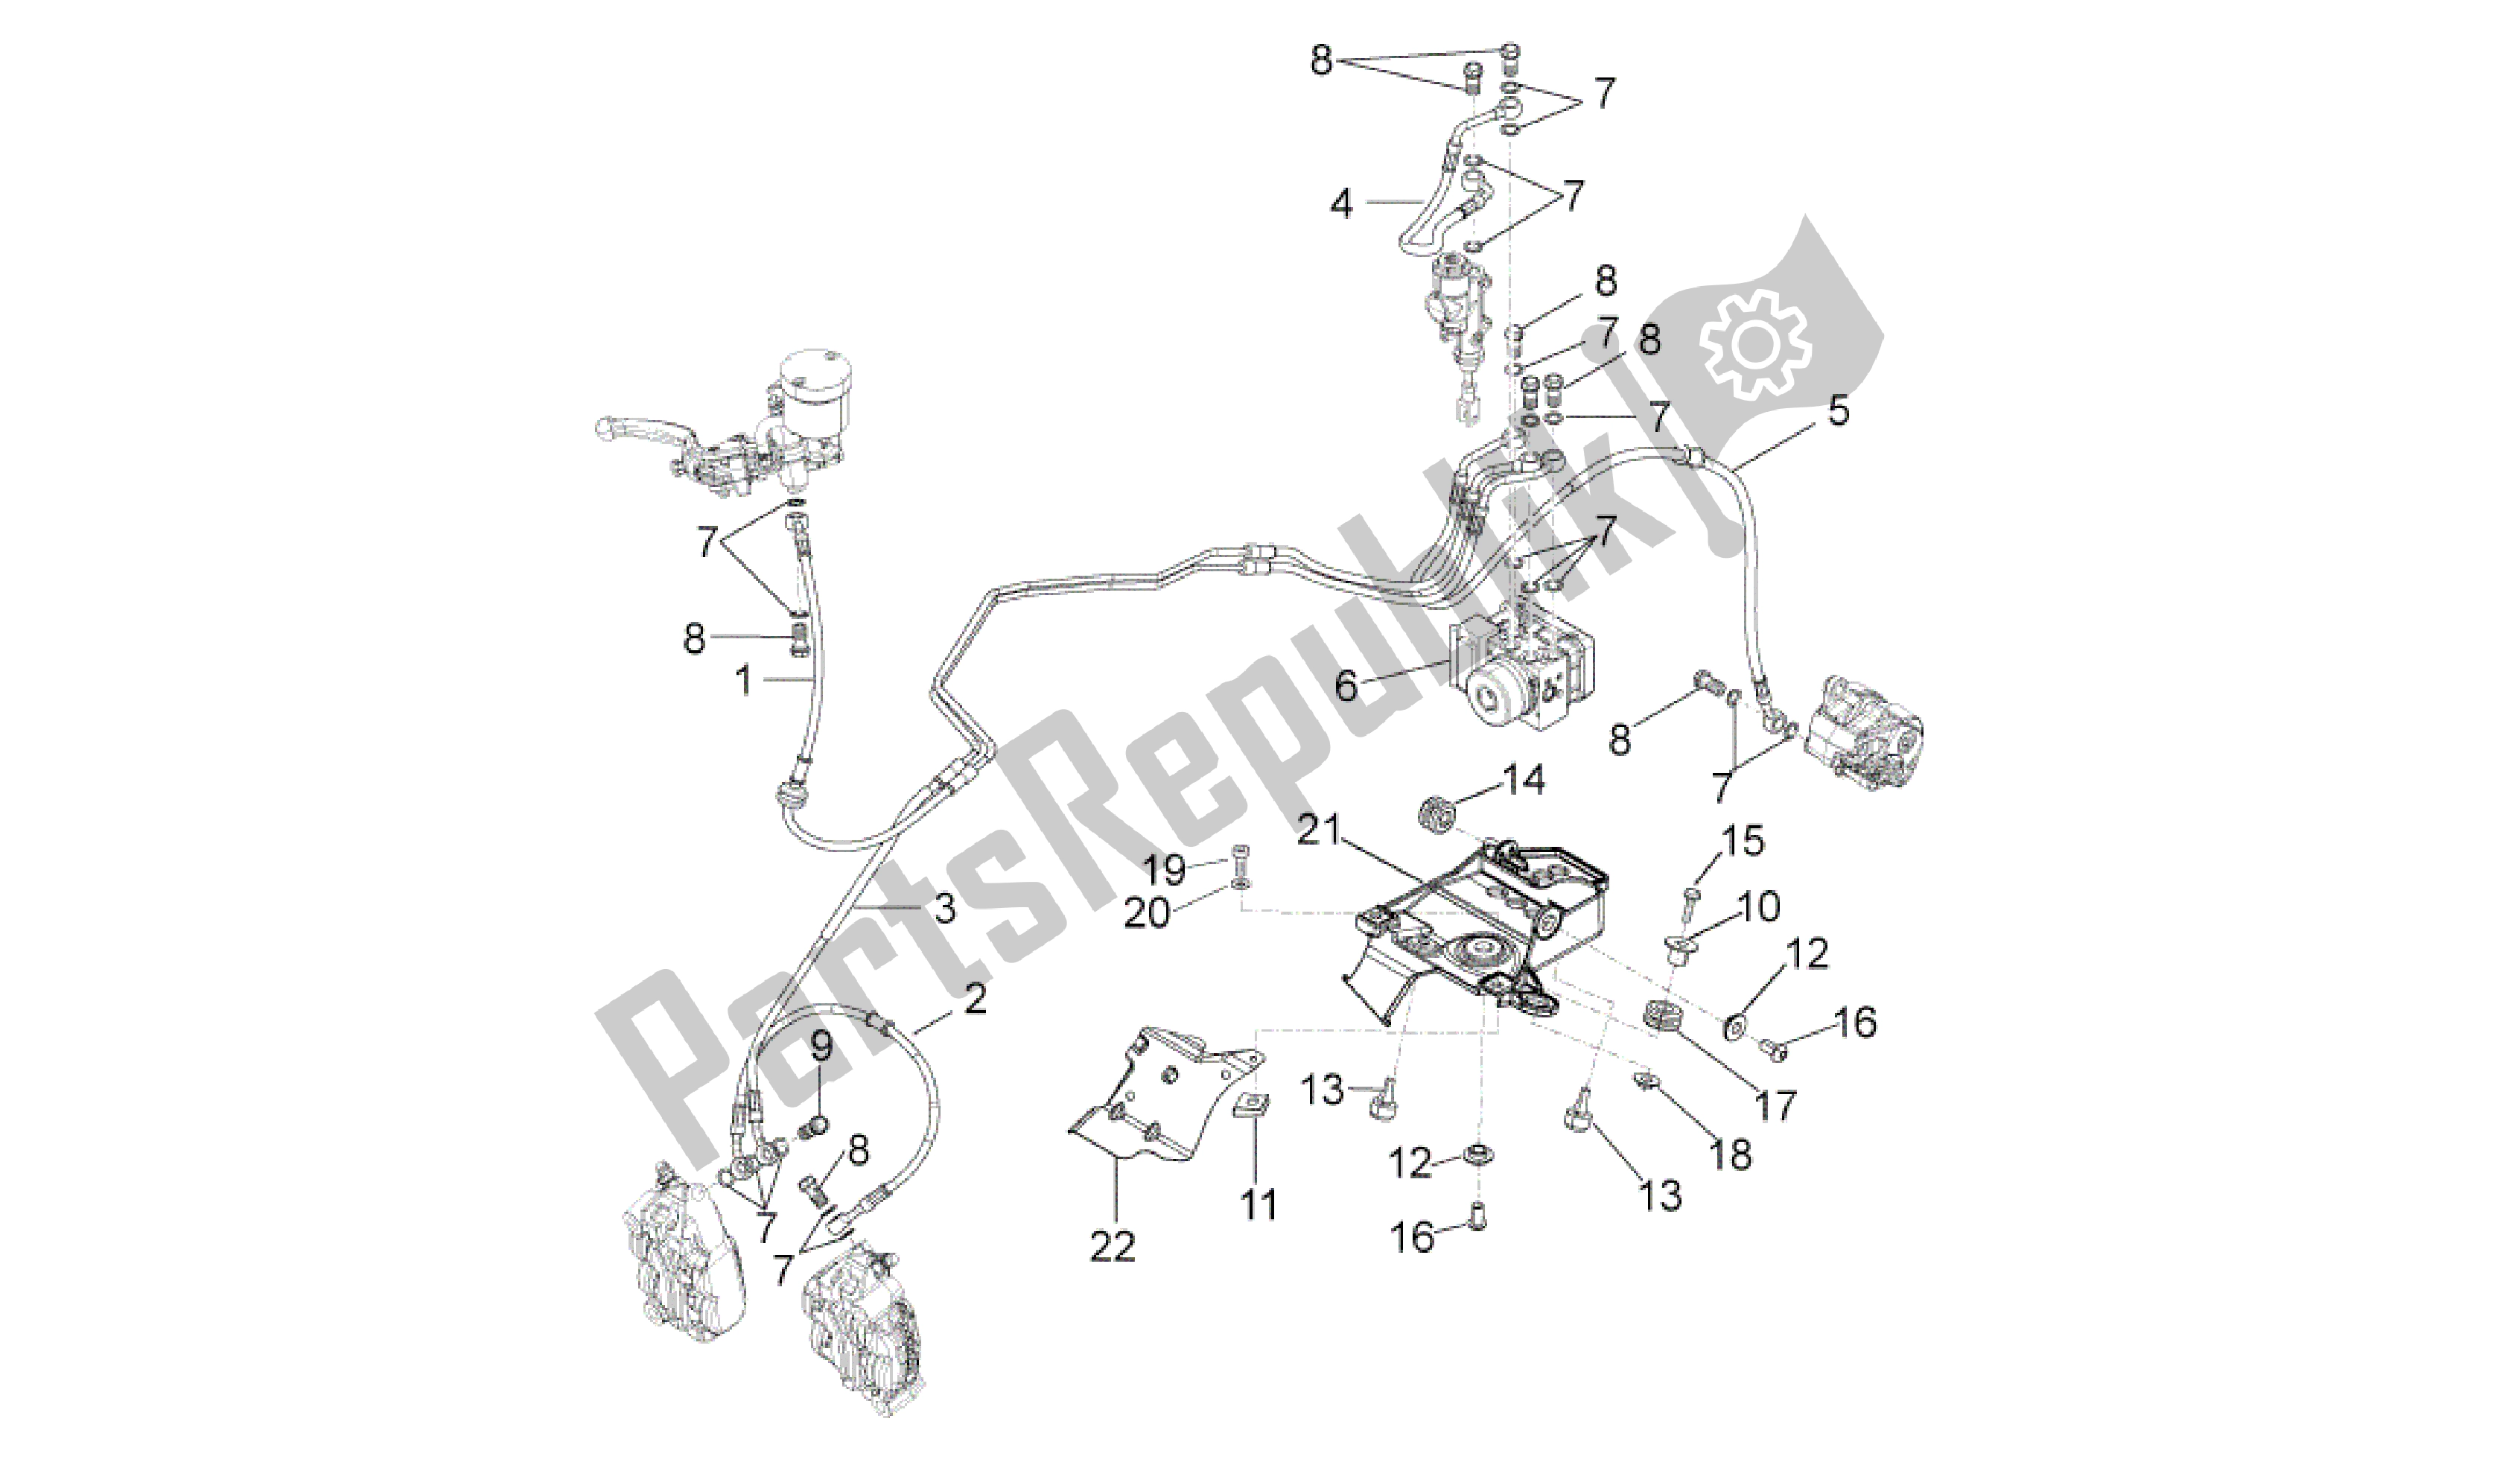 All parts for the Abs Brake System of the Aprilia RSV4 Aprc R ABS 3984 1000 2013